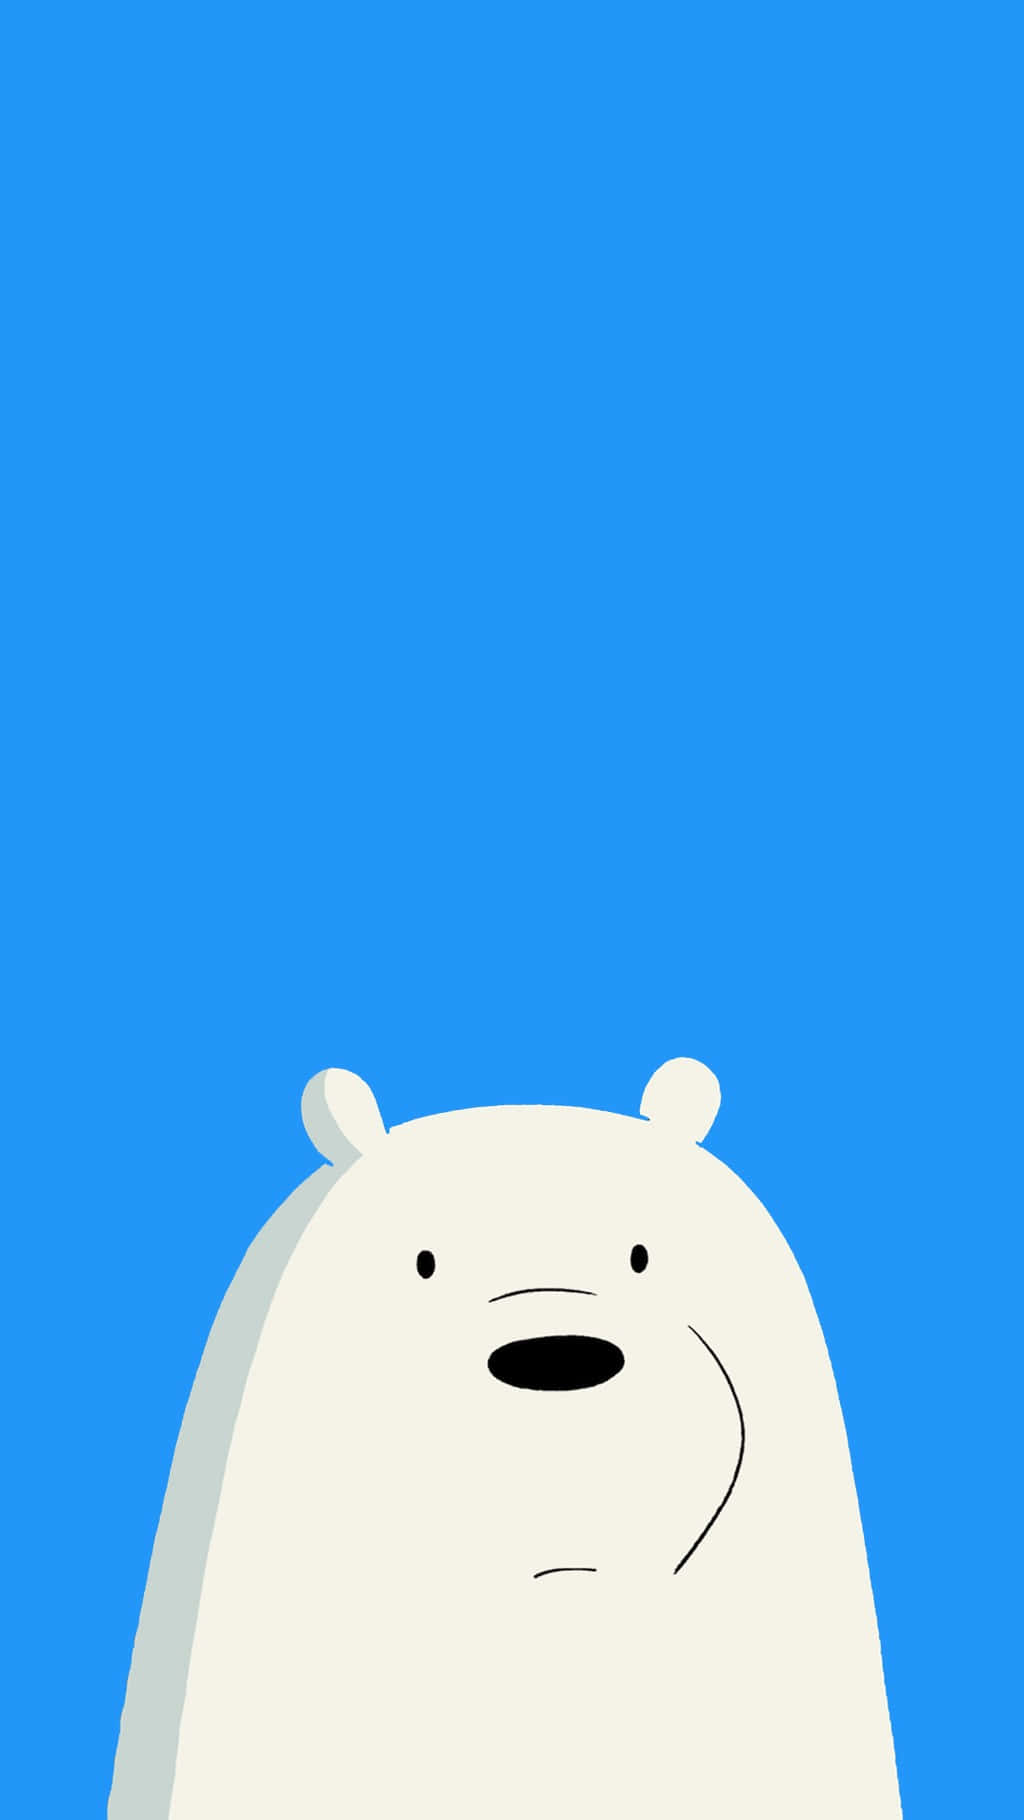 Adorable Kawaii Bear with a Colorful Background Wallpaper